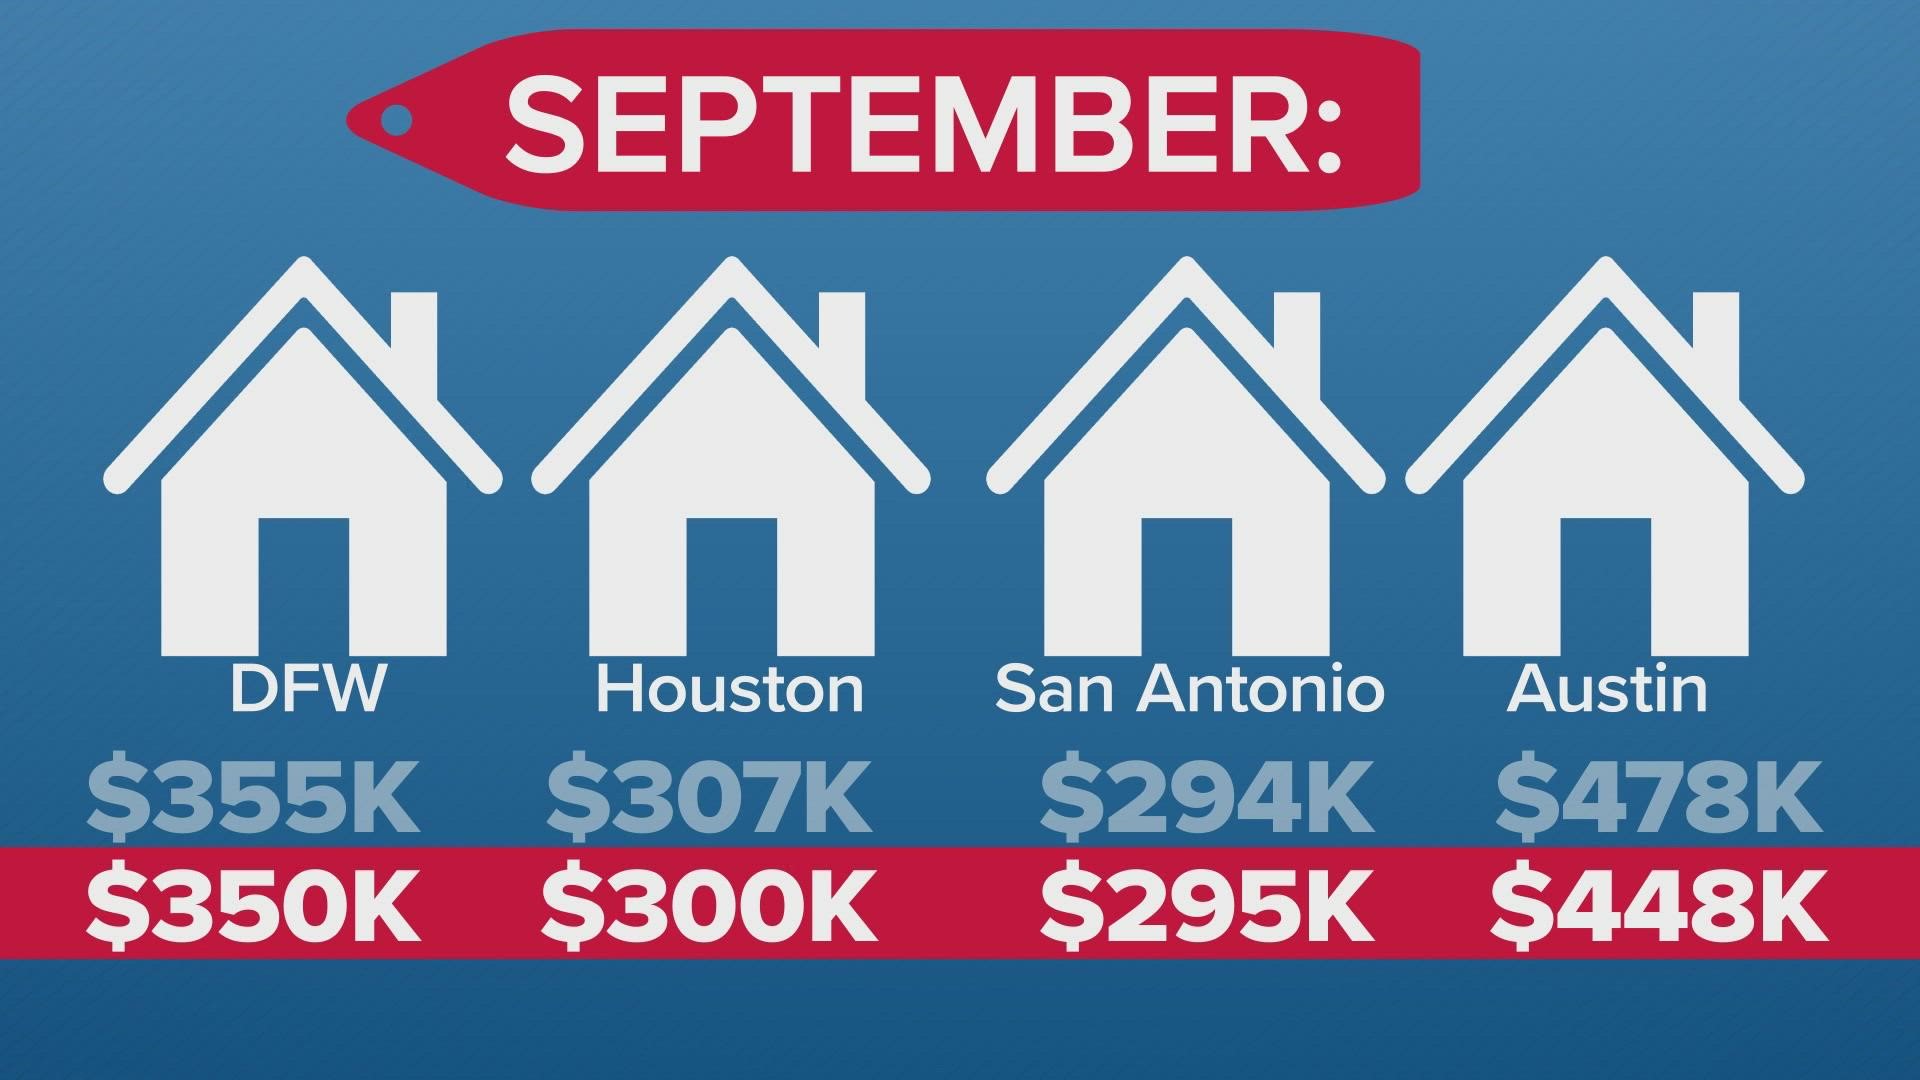 D-FW, Houston, and Austin have seen home prices drop off a bit in recent months. But prices are expected to keep climbing in the years ahead.